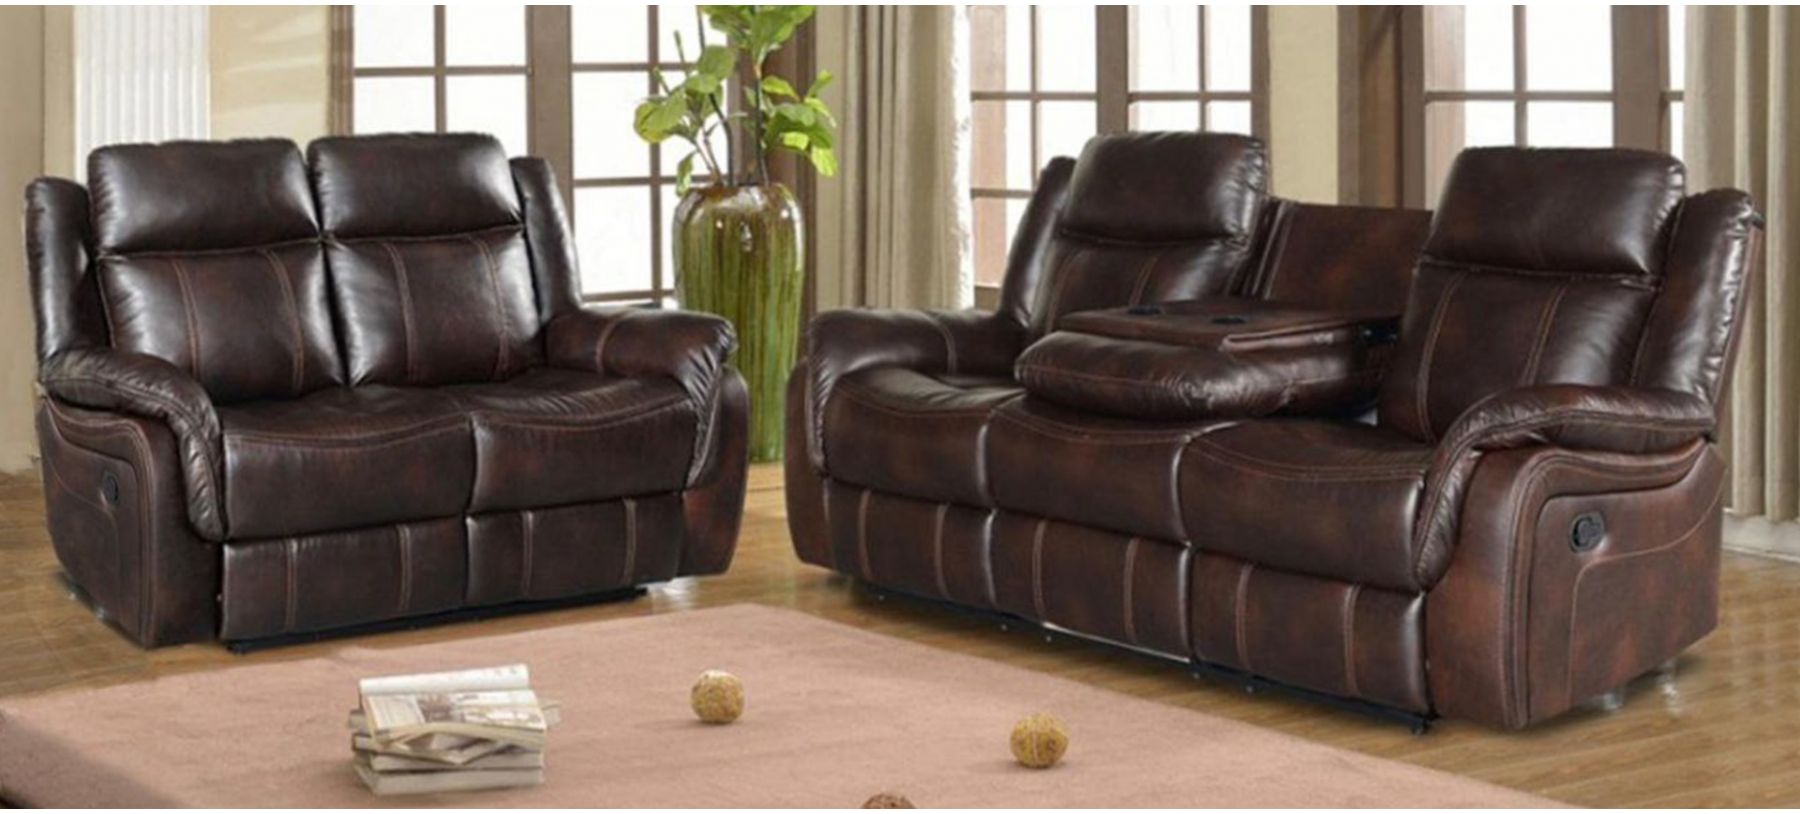 2 Seater Manual Recliner Sofa Set With